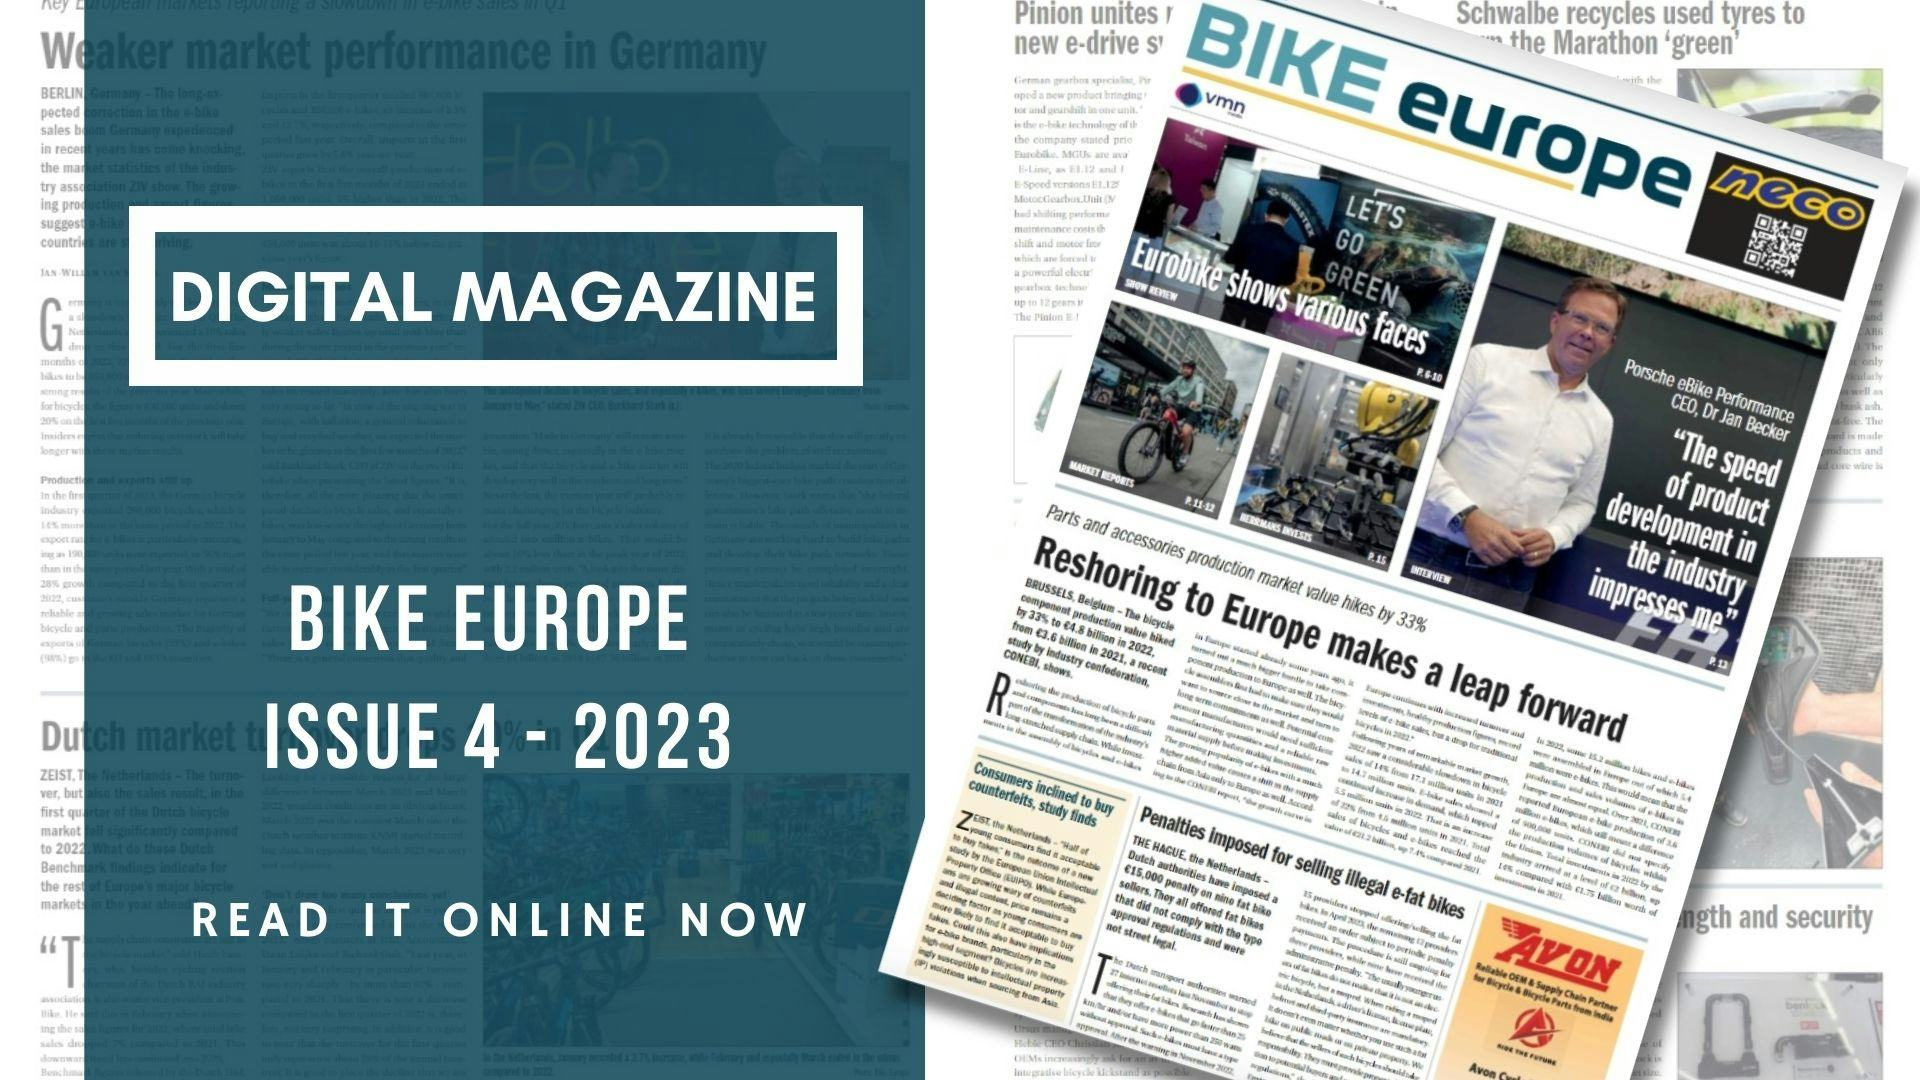 Bike Europe issue 4/2023 available online now